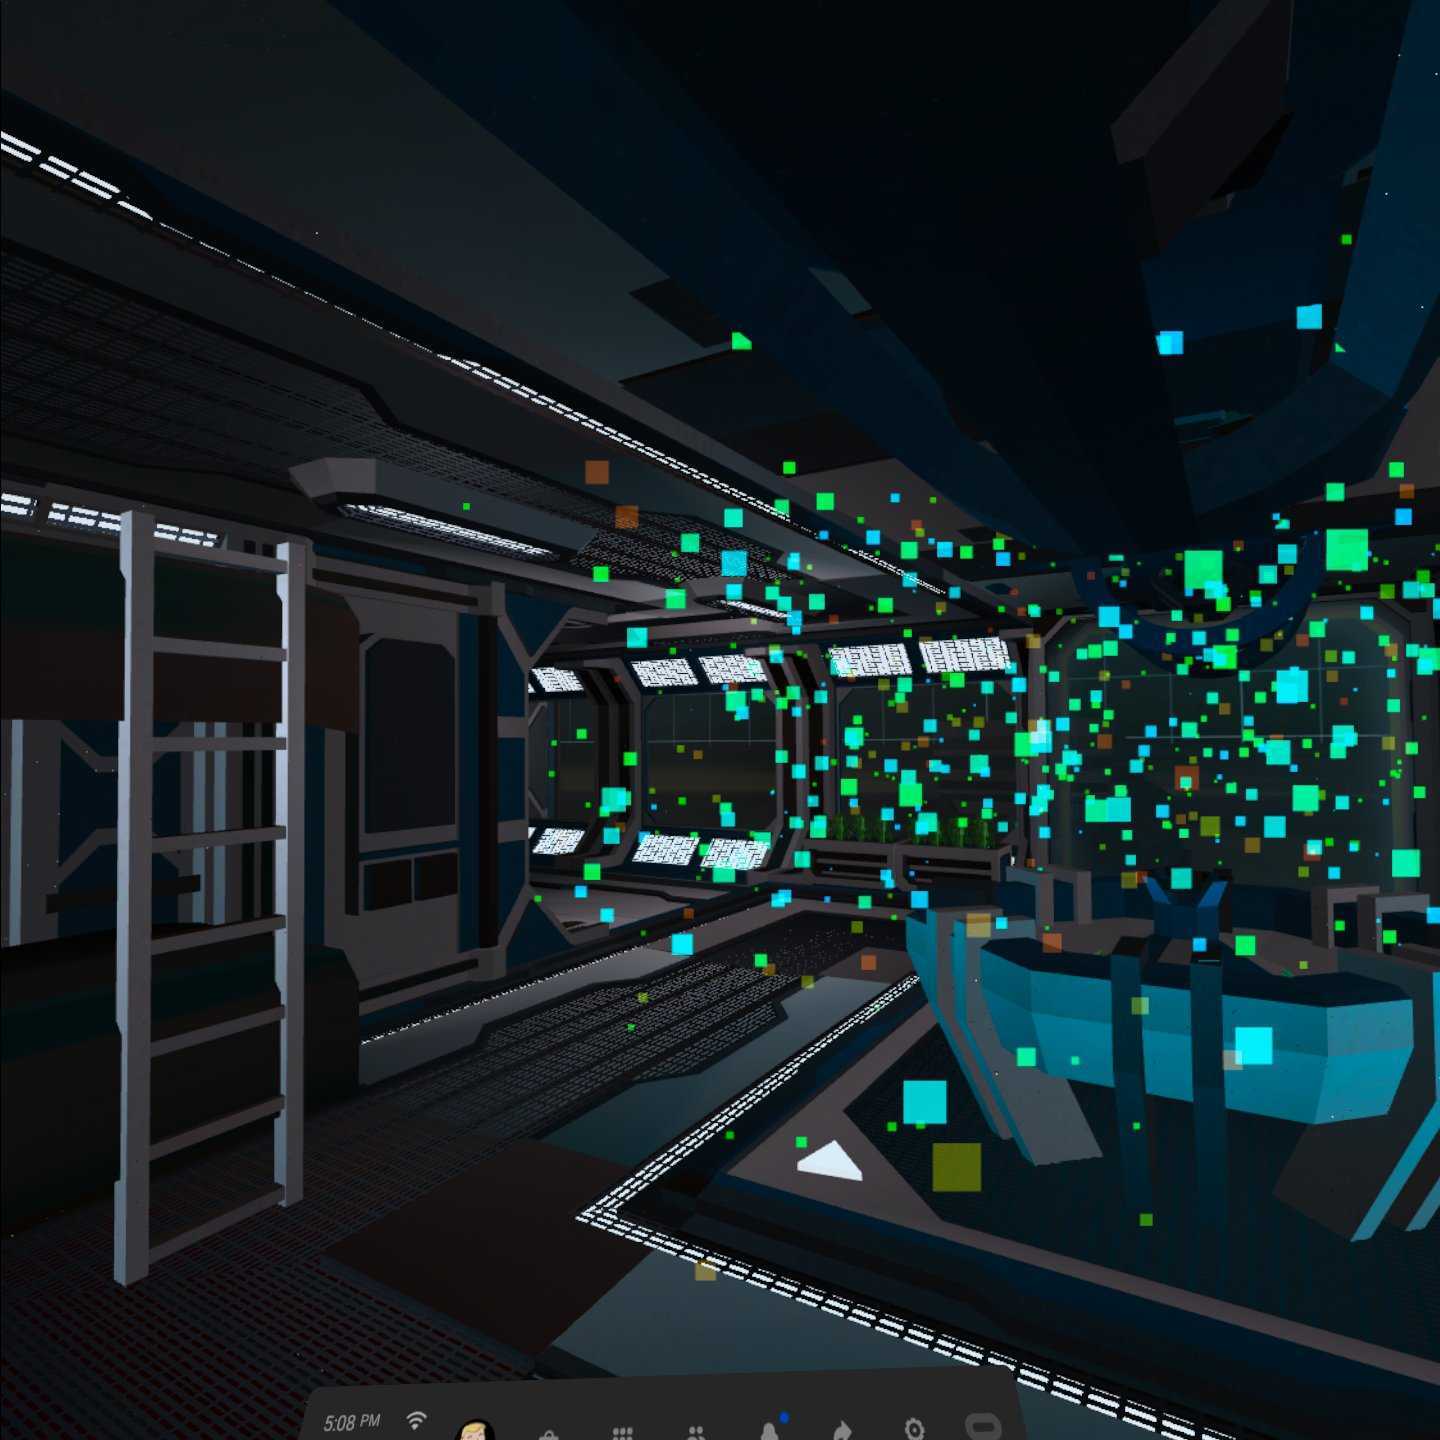 Screenshot from the game VR Room depicting a bed and hologram projector.